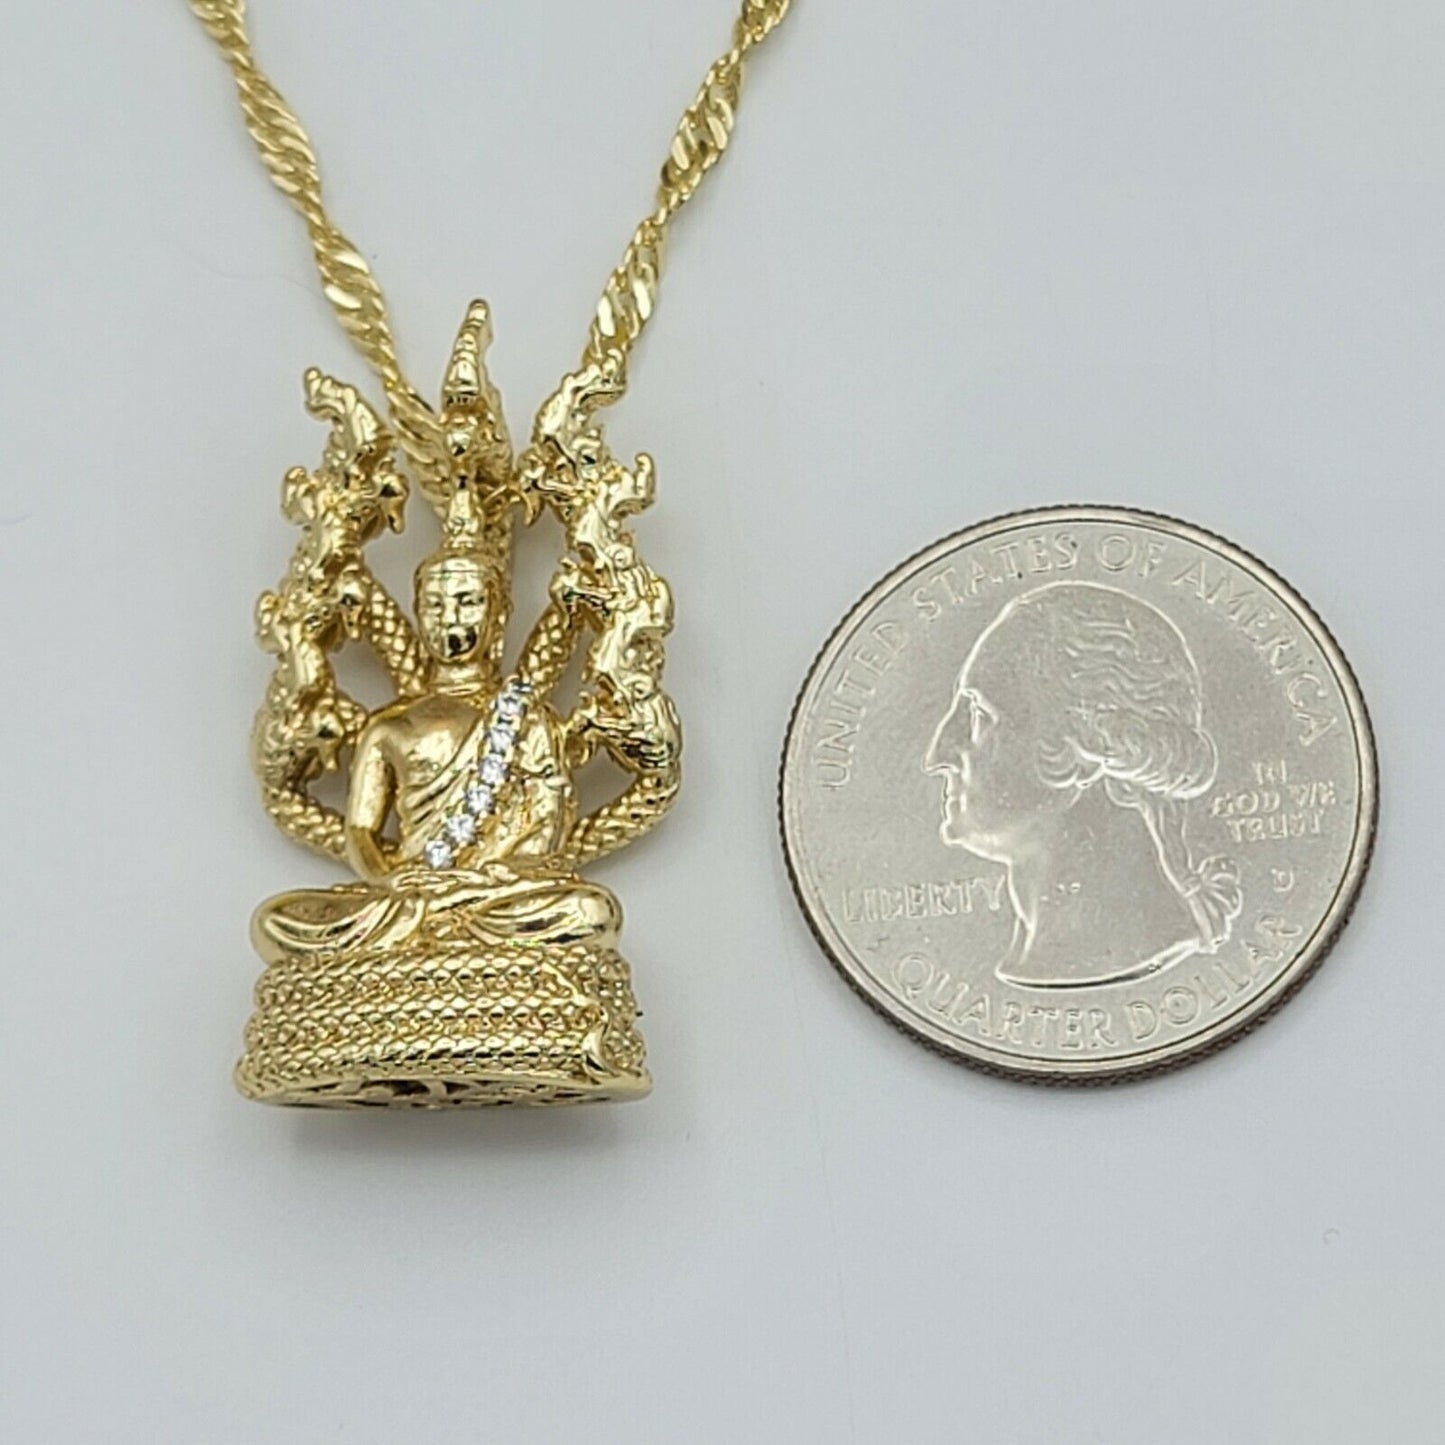 Necklaces - 14K Gold Plated. Buddha Statue Pendant & Chain.